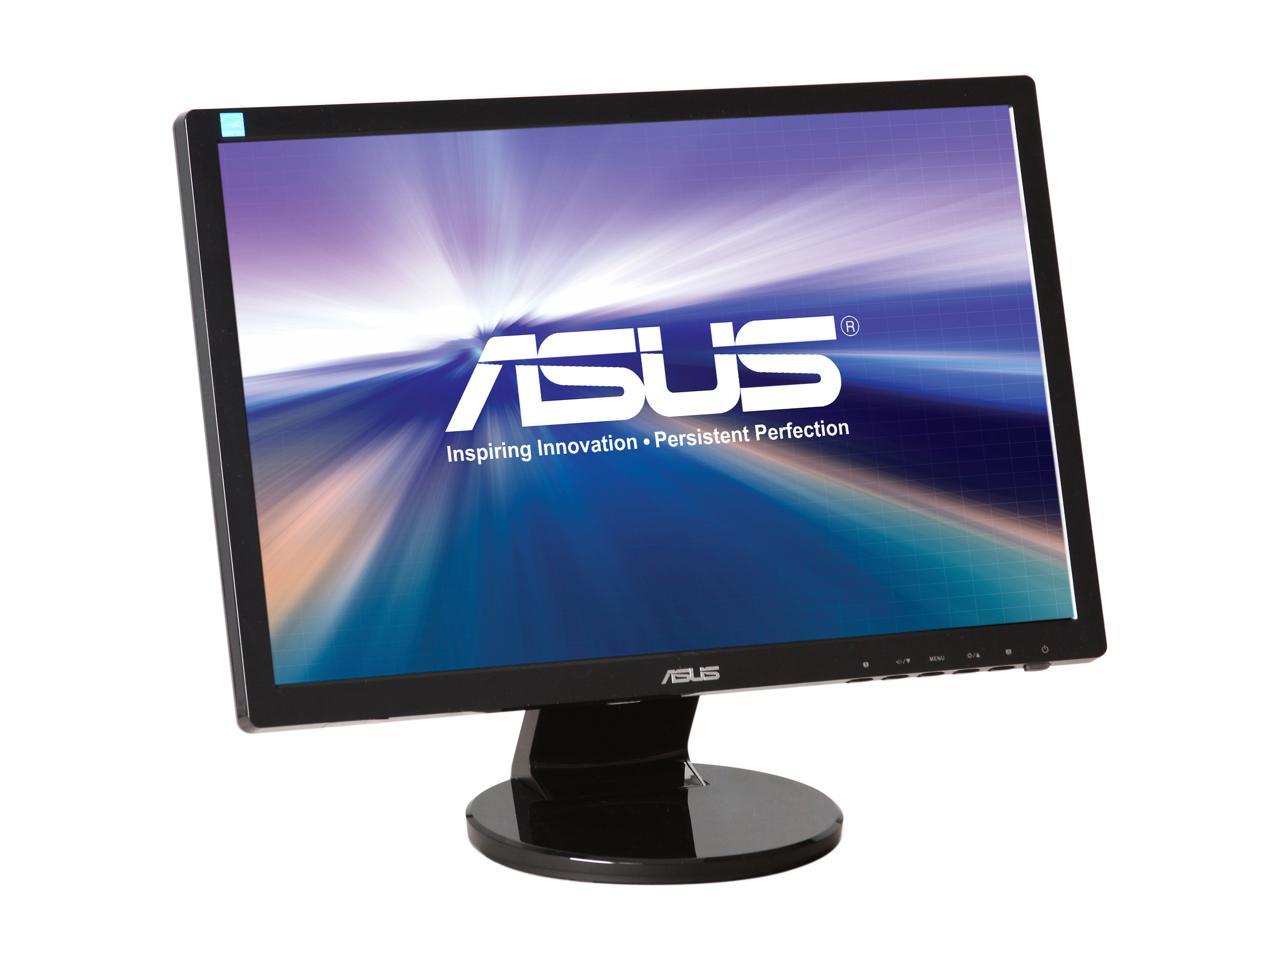 ASUS VE198T Black 19" 5ms LED BackLight LCD Monitor w/ Speakers 250 cd/m2 ASCR 10,000,000:1